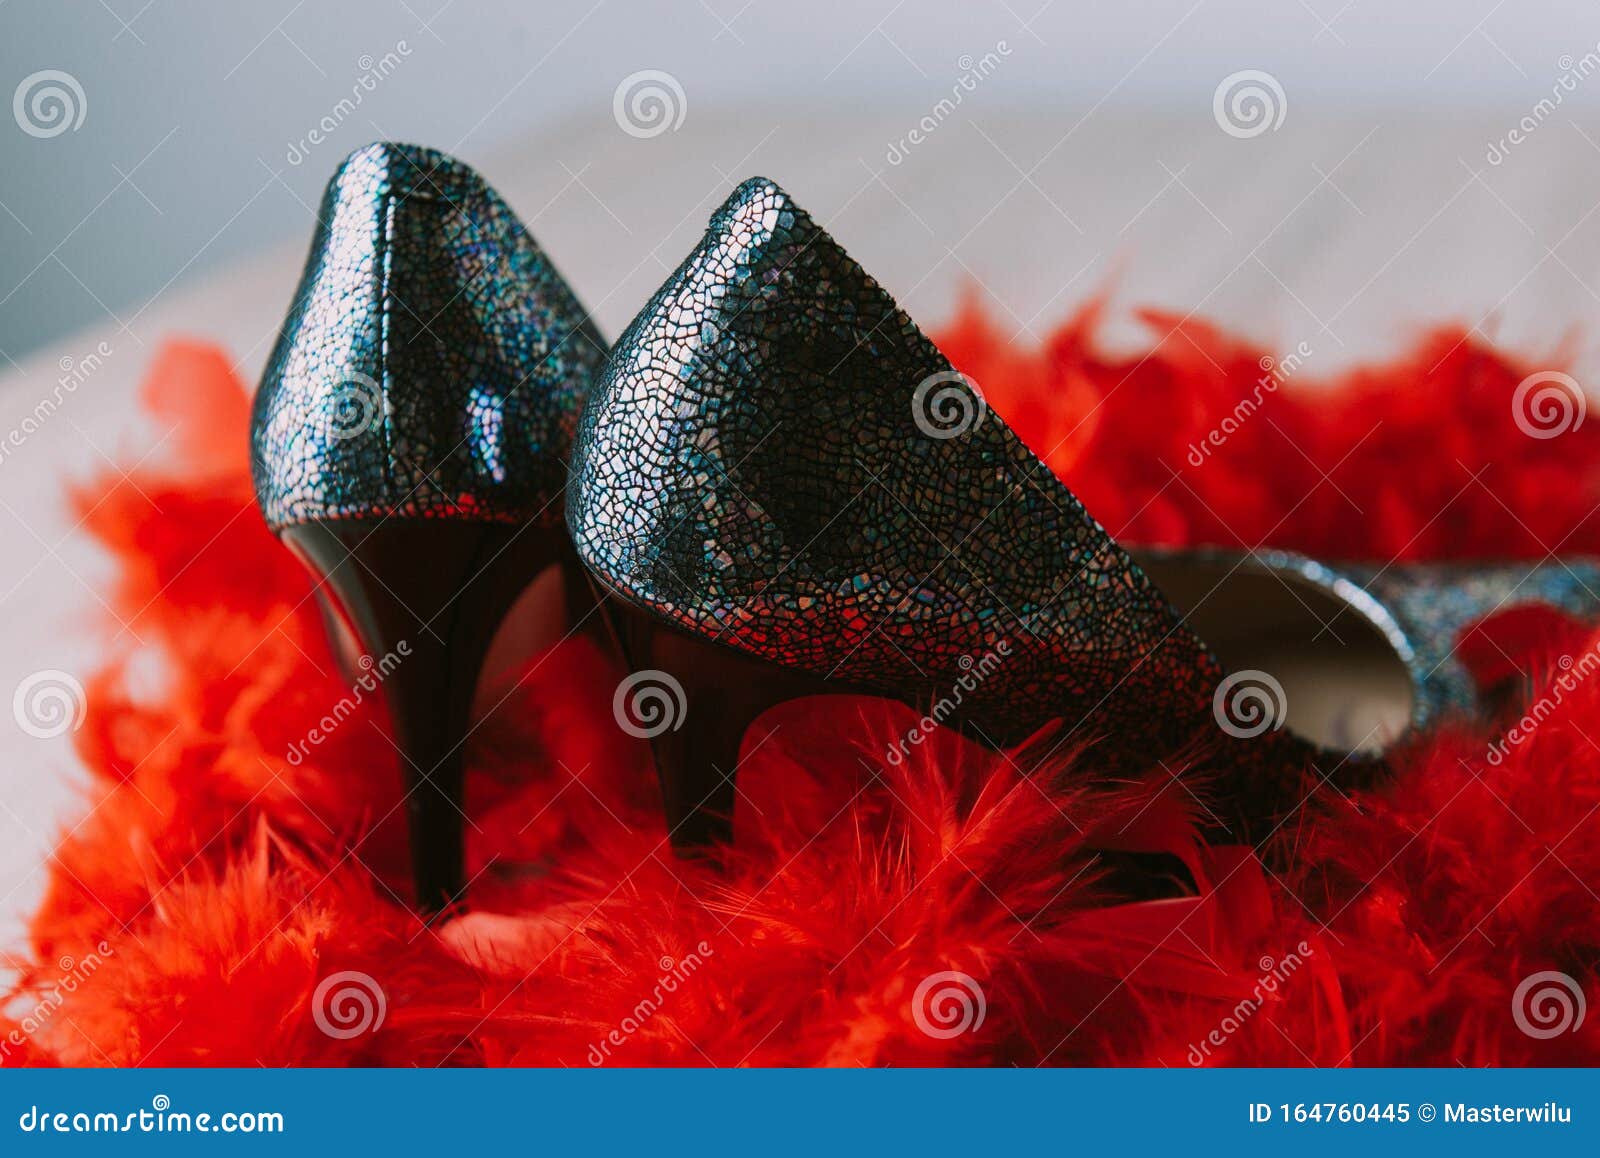 Black High Heel Women Shoes Isolated on Table Stock Image - Image of ...